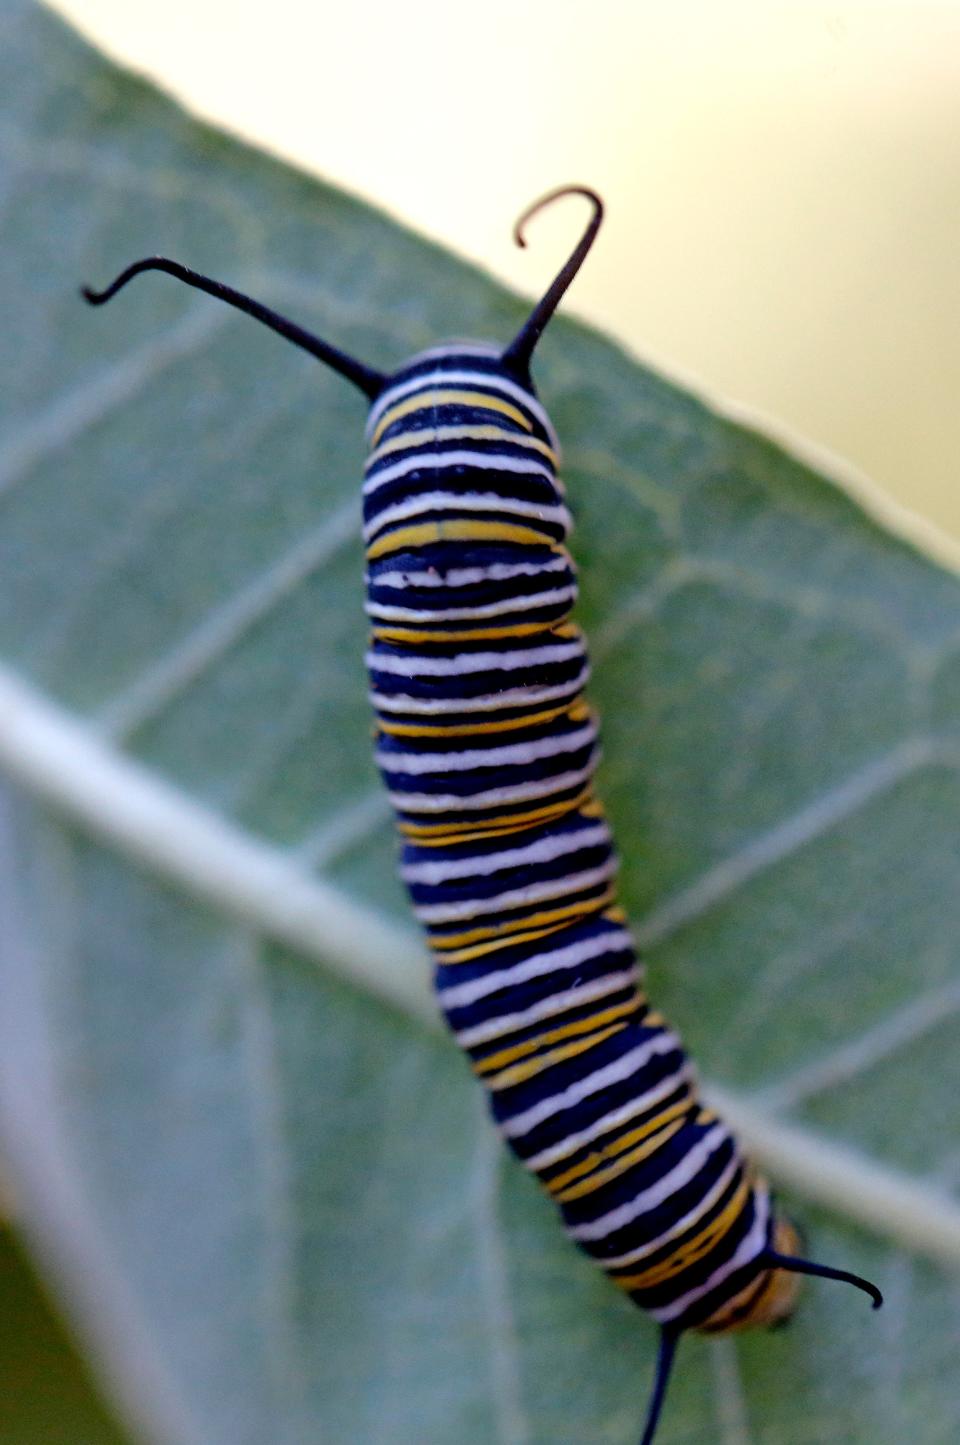 A monarch caterpillar is pictured Monday, Oct. 3, 2022, at Oklahoma City Zoo and Botanical Garden in Oklahoma City. The zoo is tagging the butterflies to track their migration.